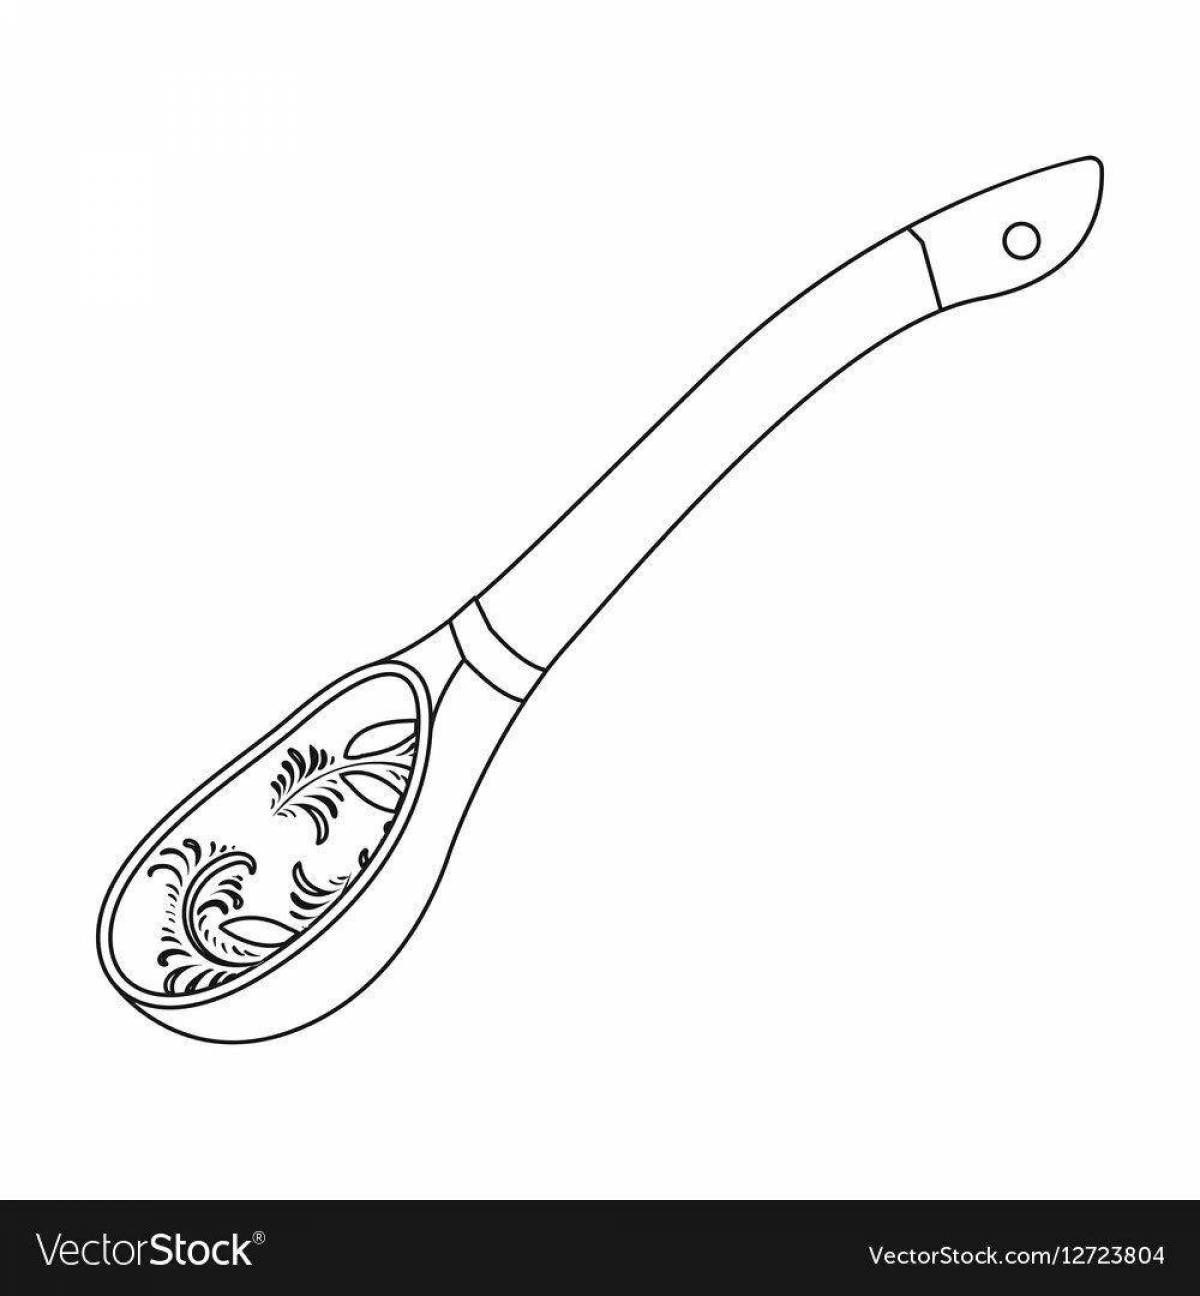 Fascinating coloring page of painted spoon